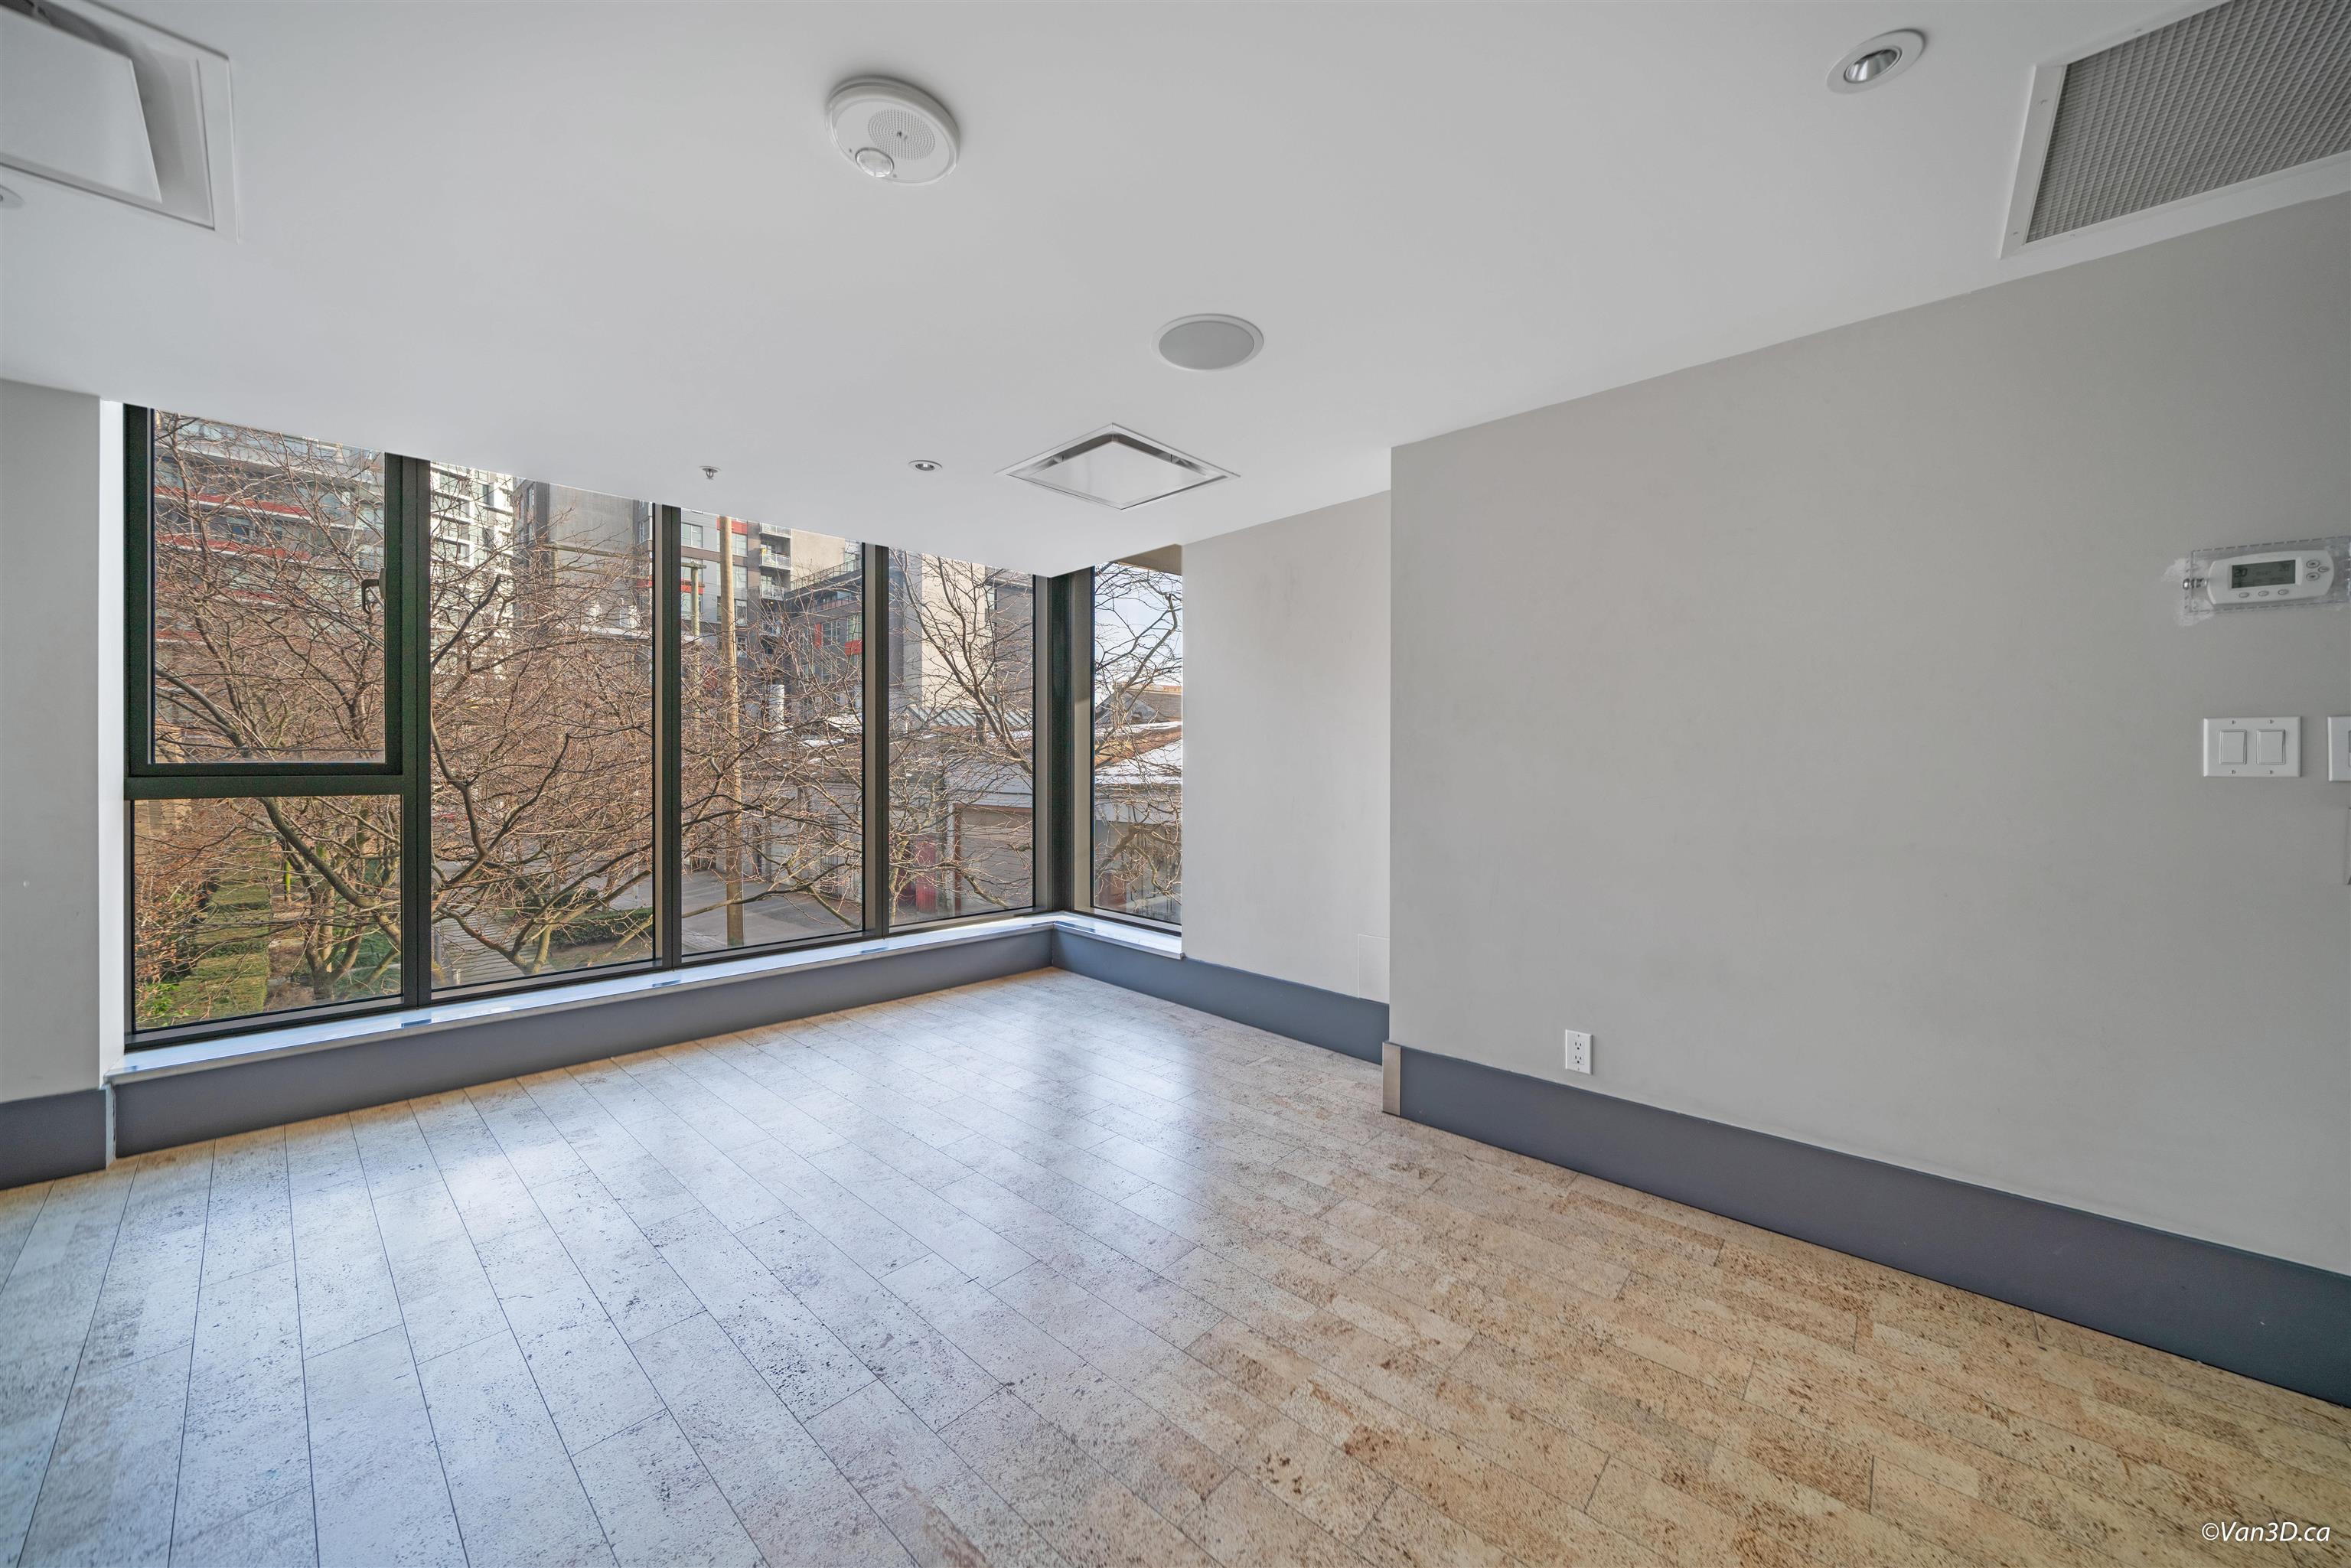 Listing image of 801 288 W 1ST AVENUE